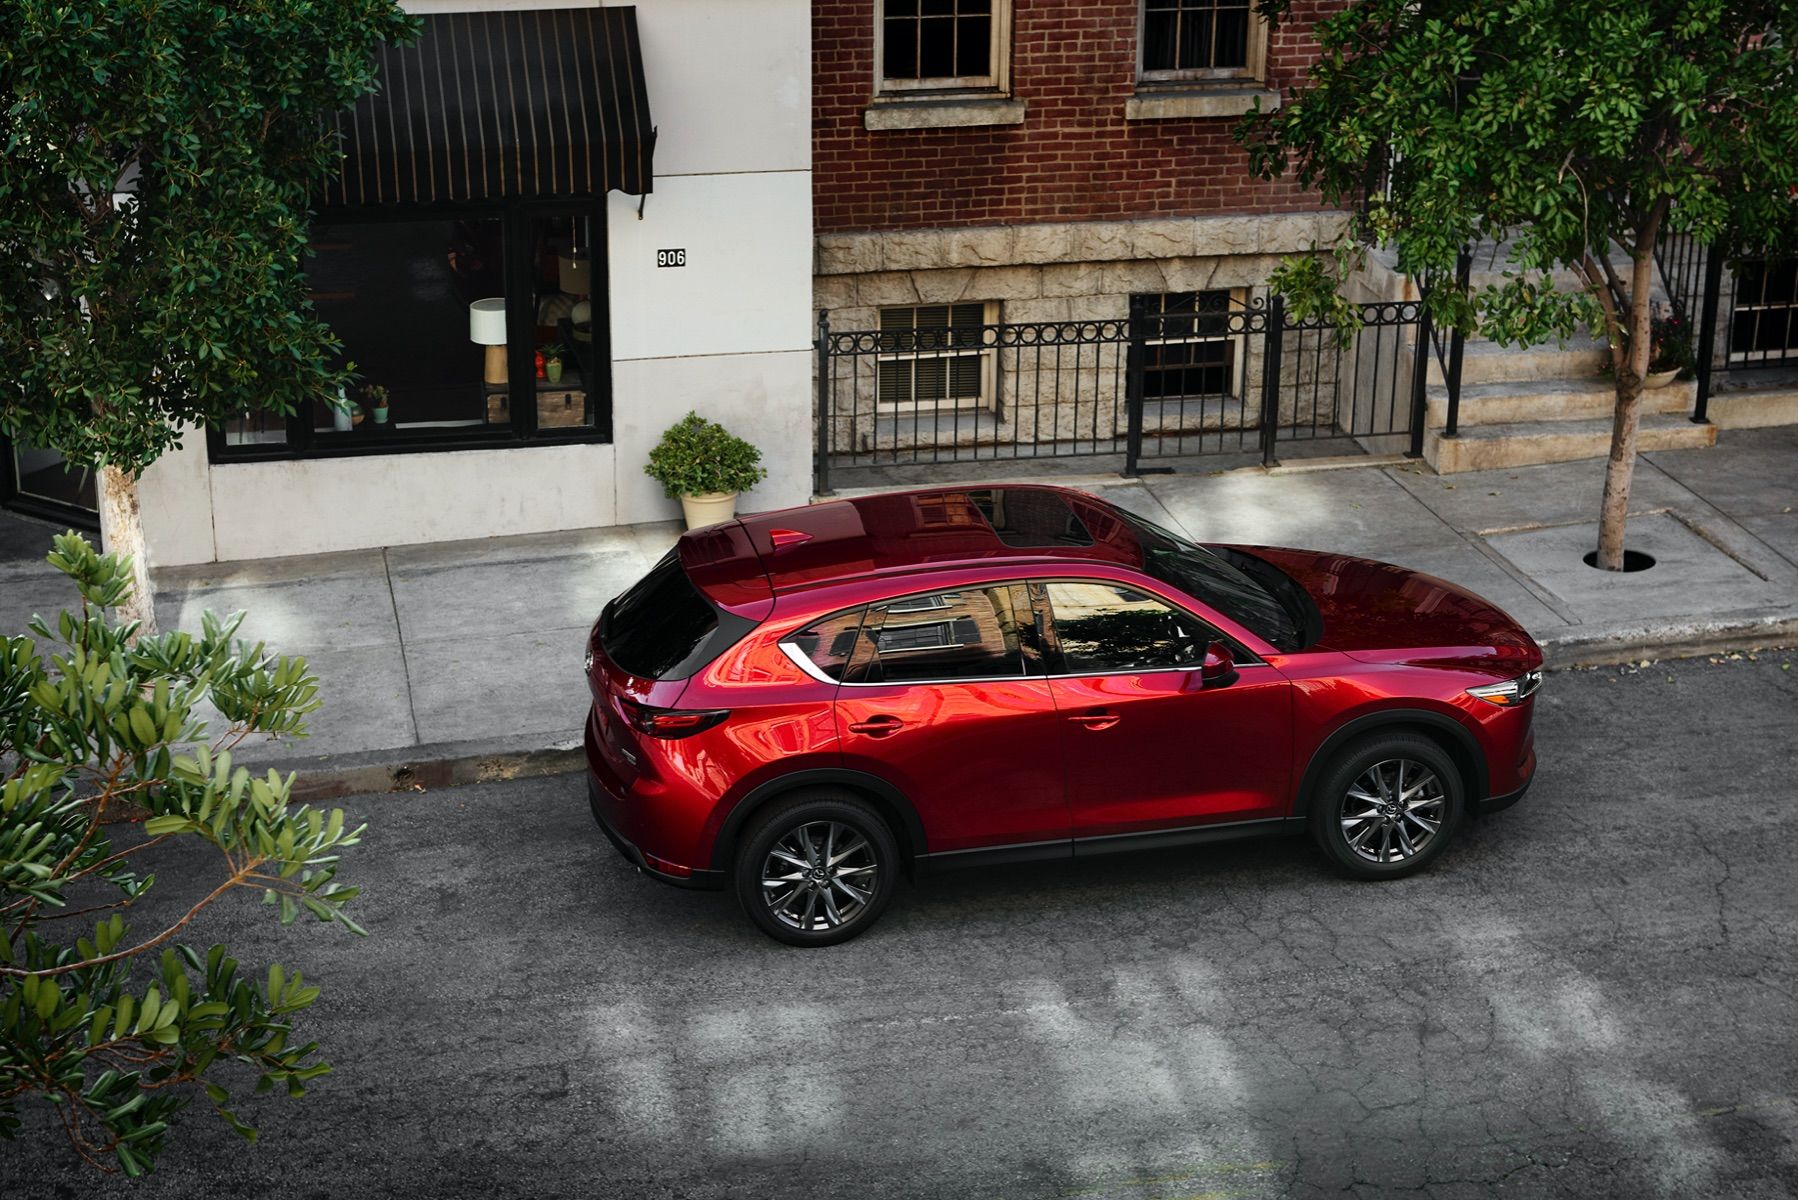 Mazda CX-5 Is A Car And Driver 10 Best Winner For A Fourth Consecutive Year